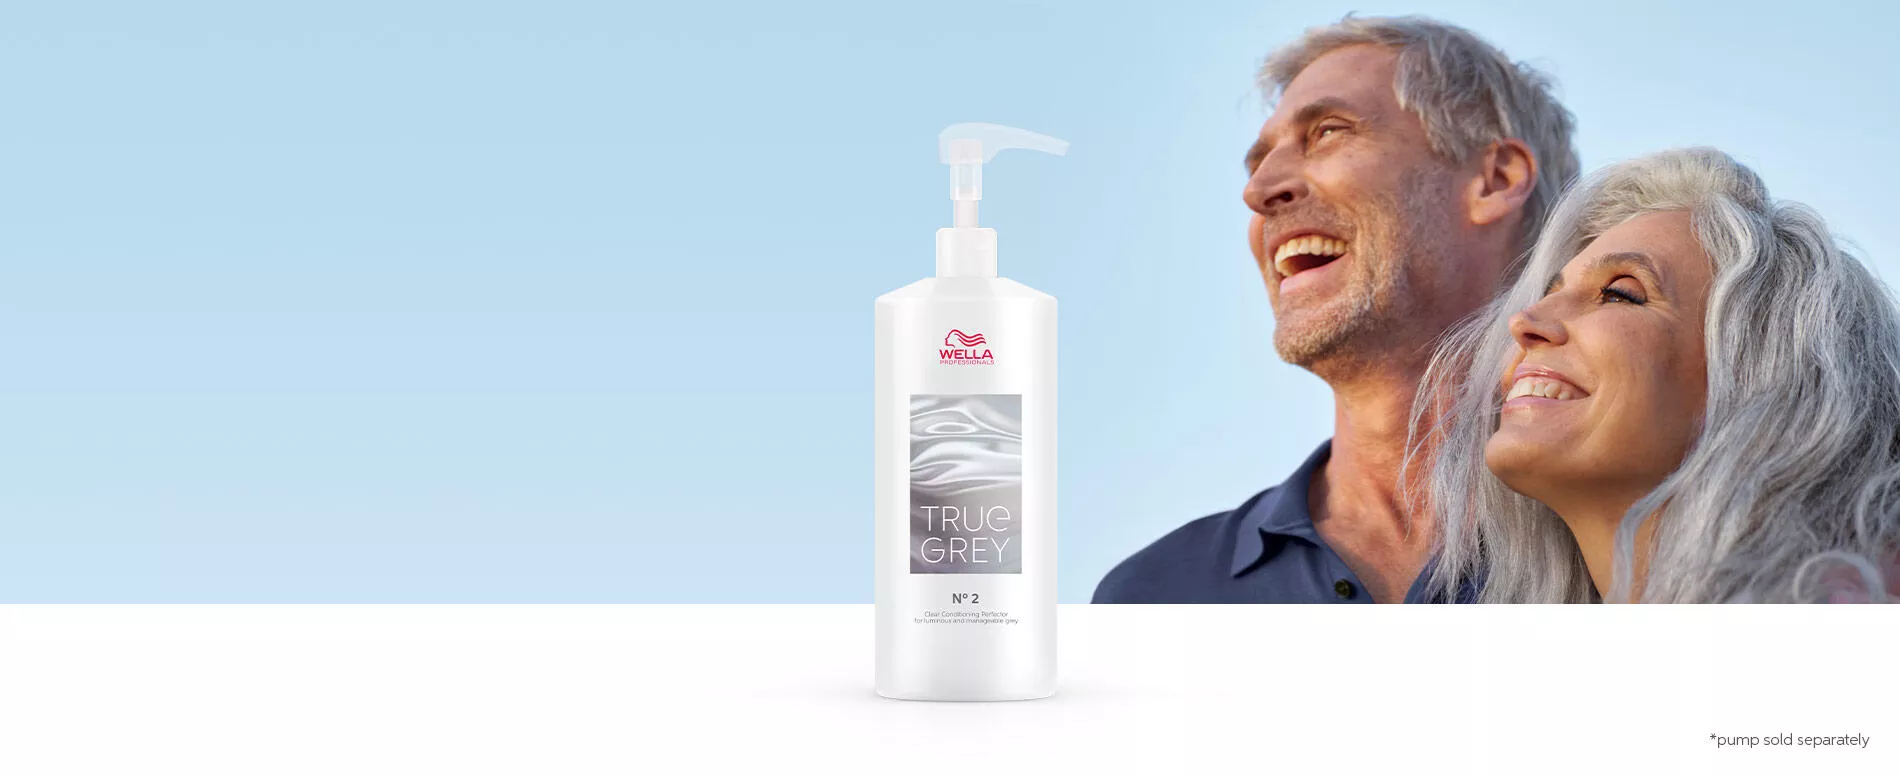 Male and female with natural grey hair laughing in the sun with True Grey conditioning perfector bottle in the foreground